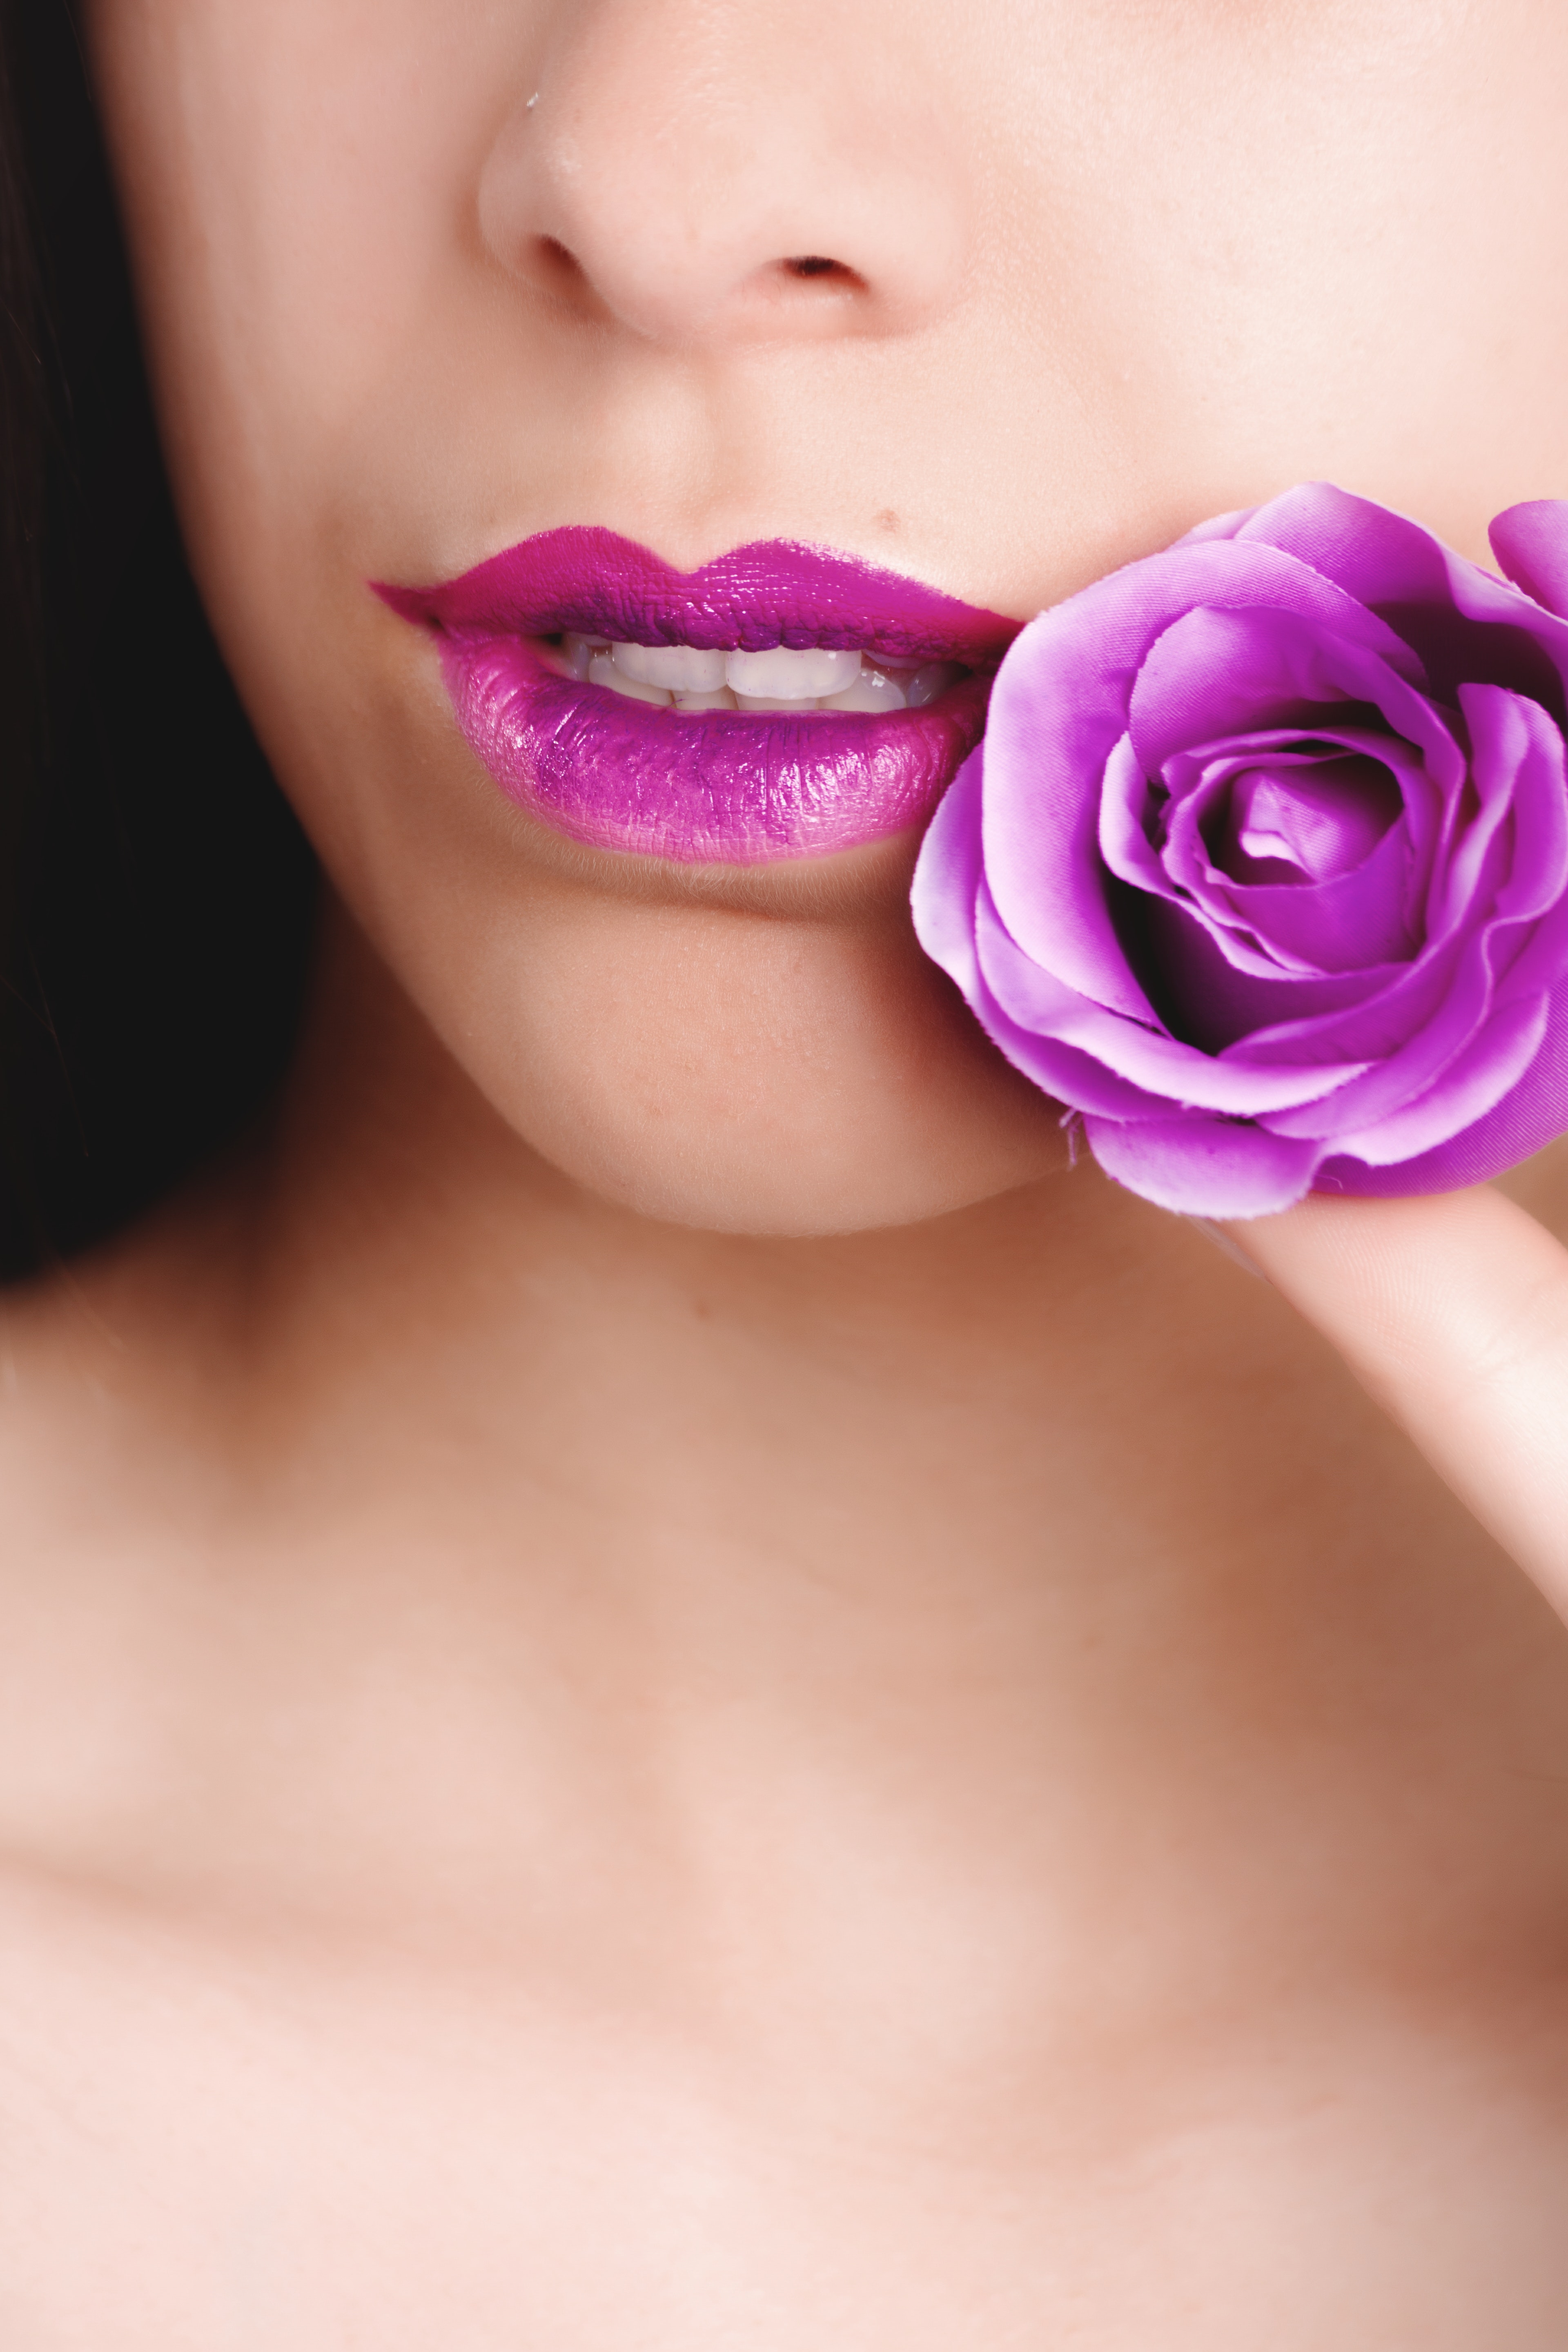 Woman with pink lipstick holding pink rose photo